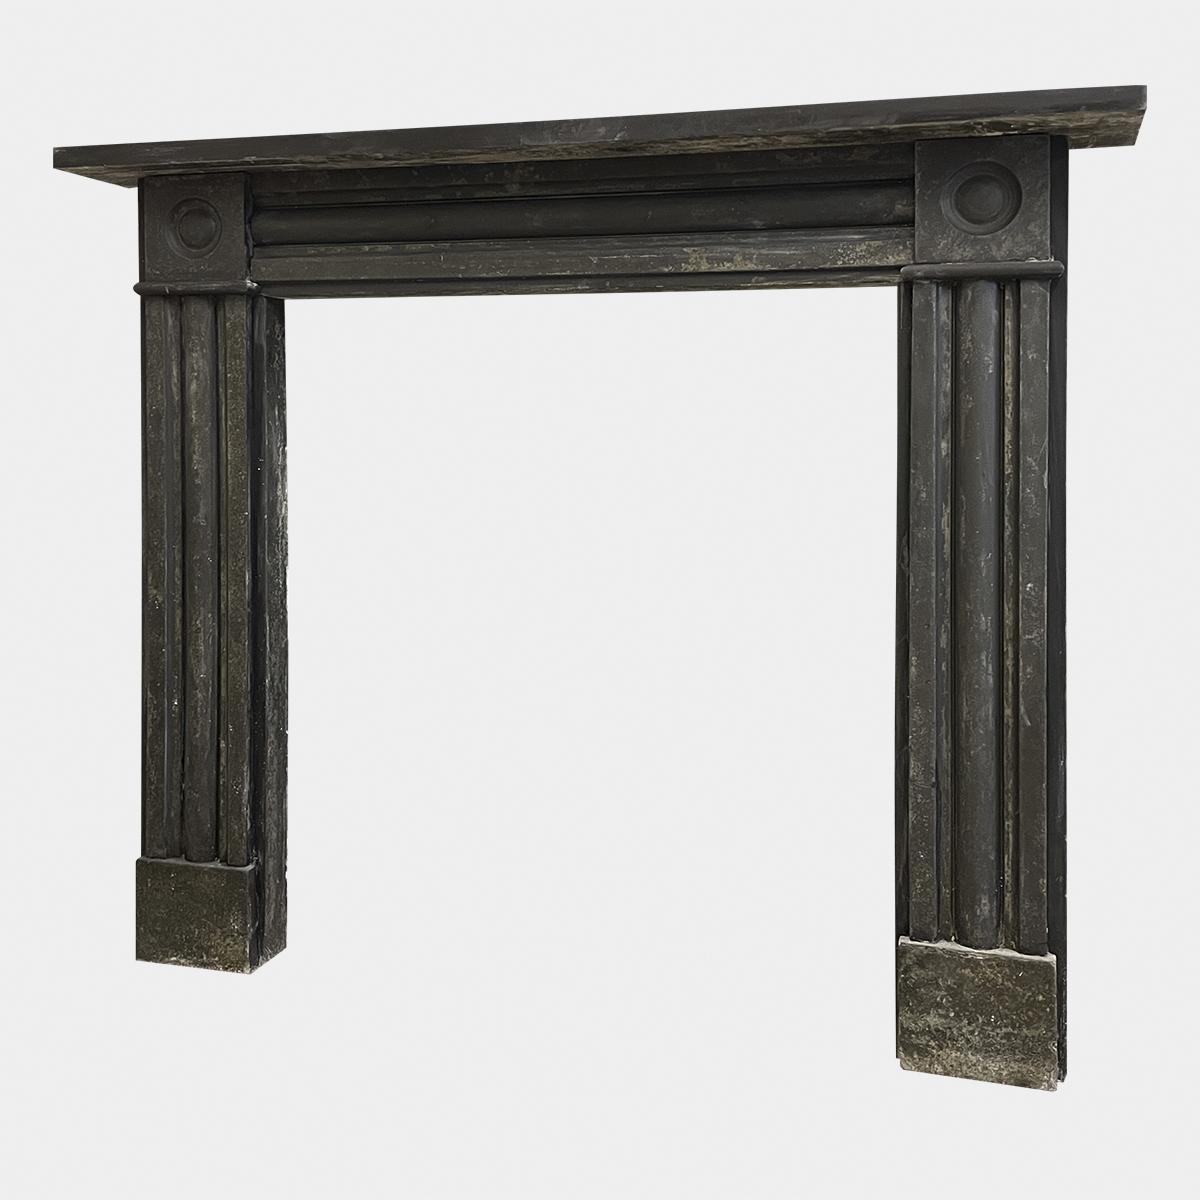 An English Regency period Slate fireplace from the early 19th century, circa 1815. 
The cushion panelled jambs on square foot blocks terminating in carved roundel corner blocks. The conforming frieze again in a cushion moulding with simple shelf